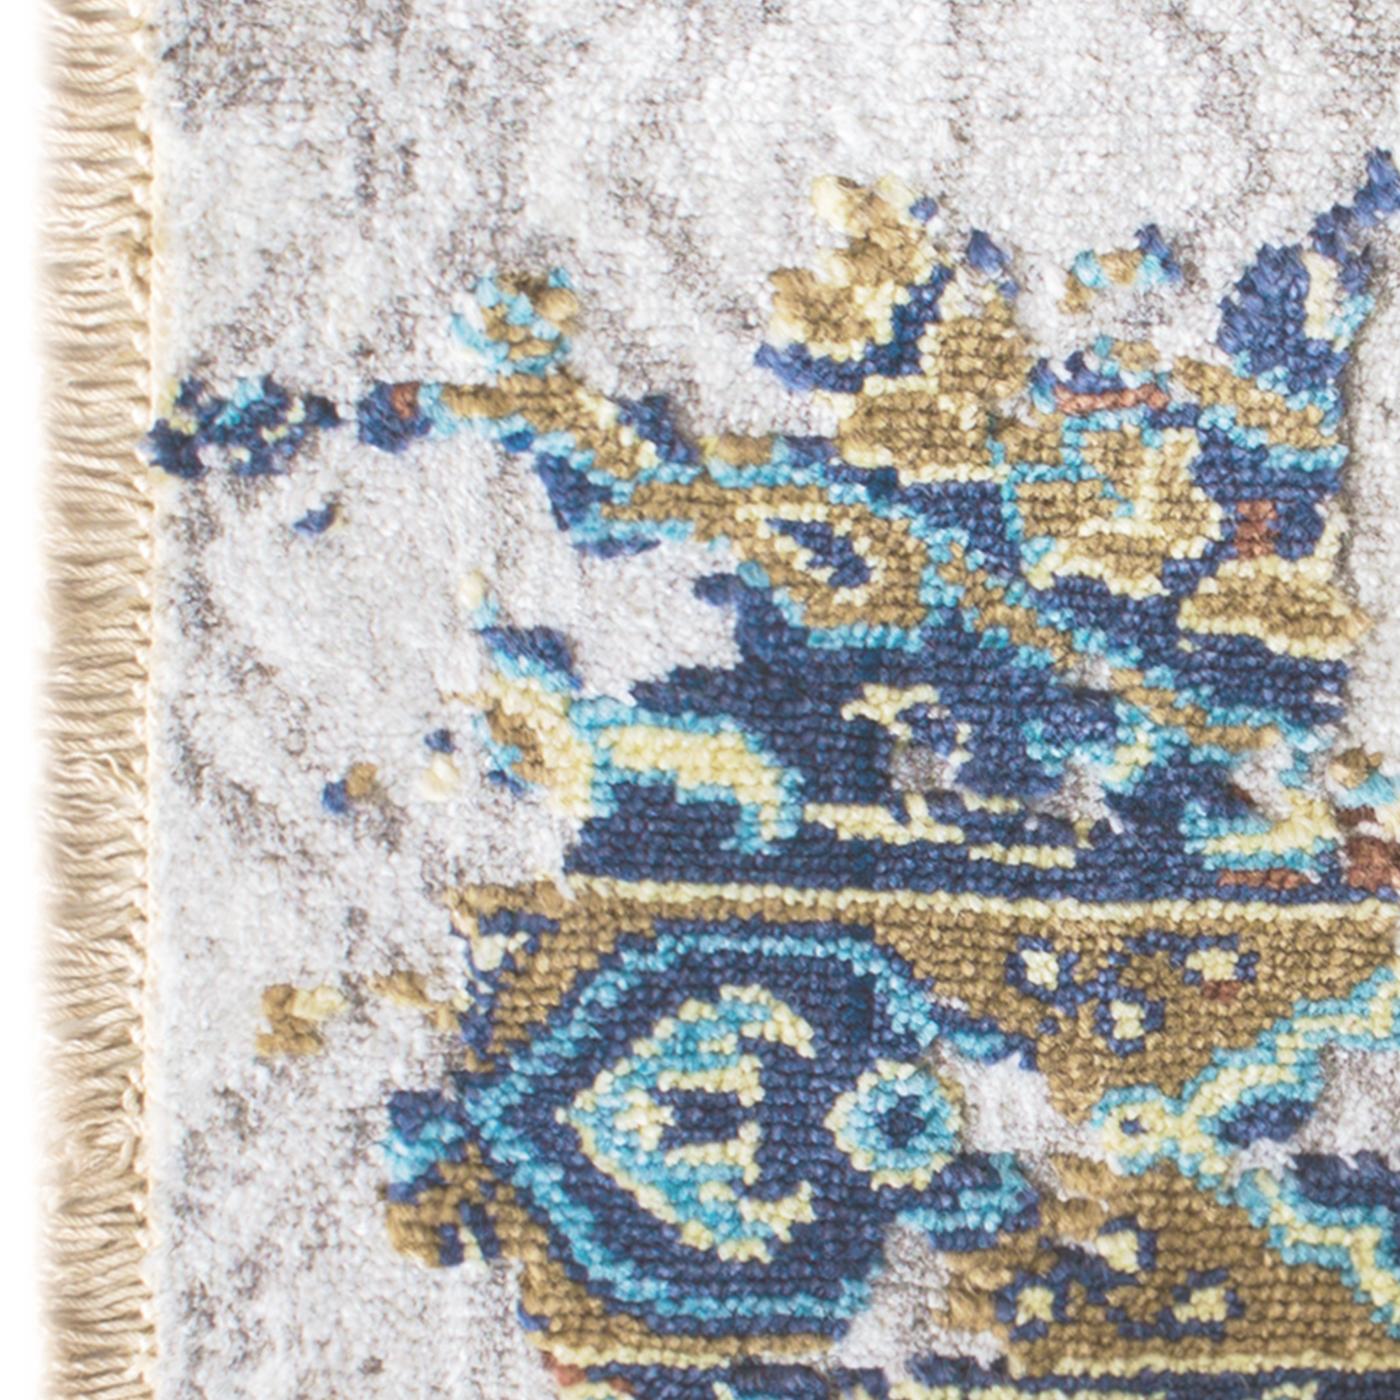 Exquisitely interpreting the traditional damask fabric pattern in an evocative and mesmerizing way, this rug is entirely crafted by expert artisans using a combination of bamboo, wool, and viscose. The fibers are dyed with natural methods and